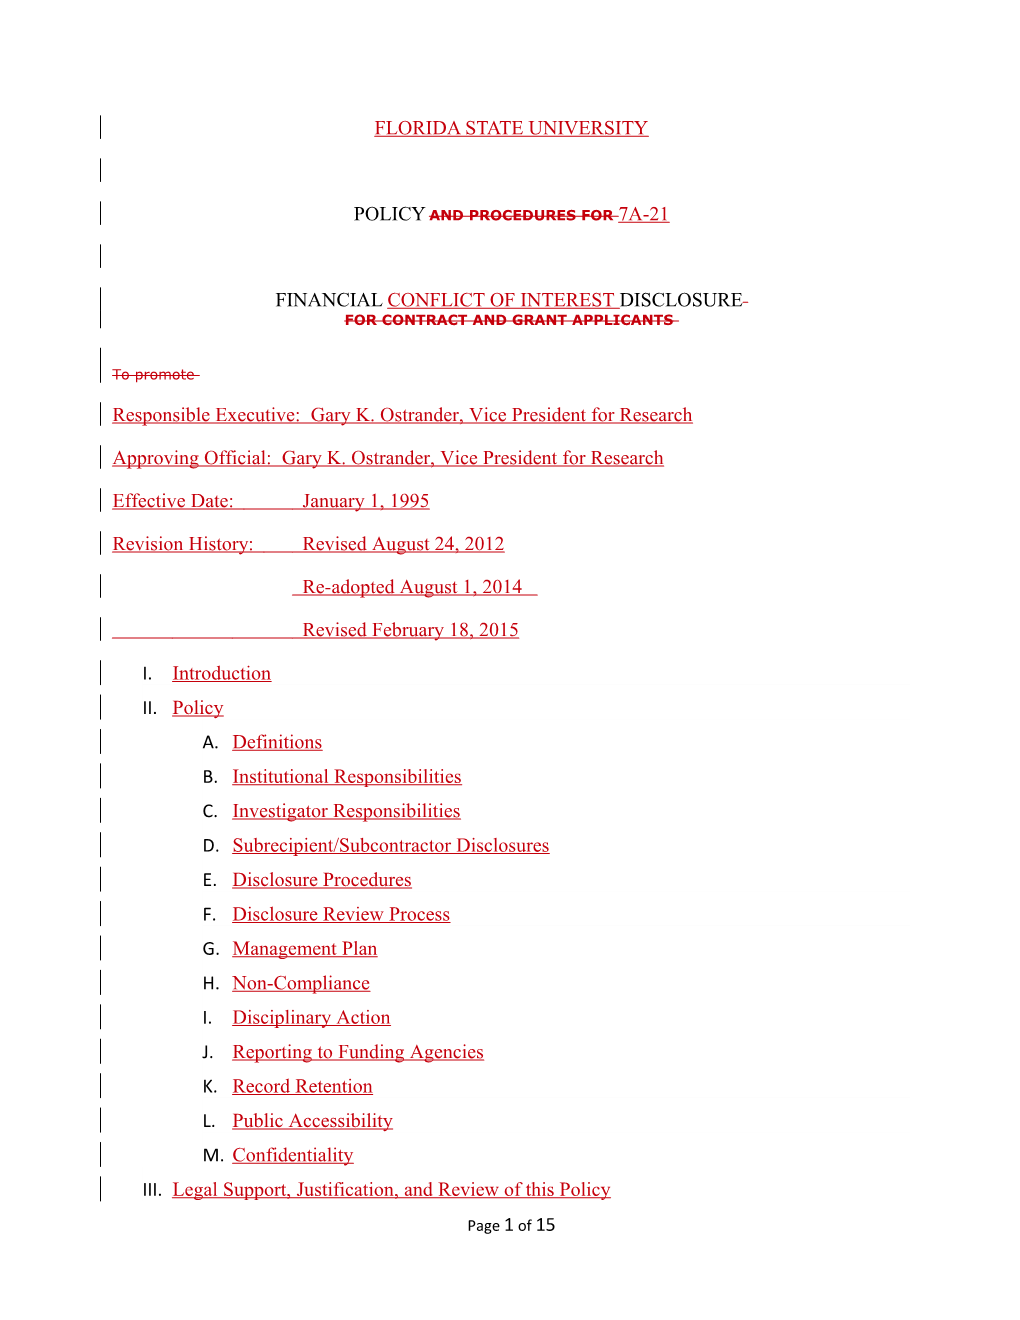 Policy and Procedures for 7A-21